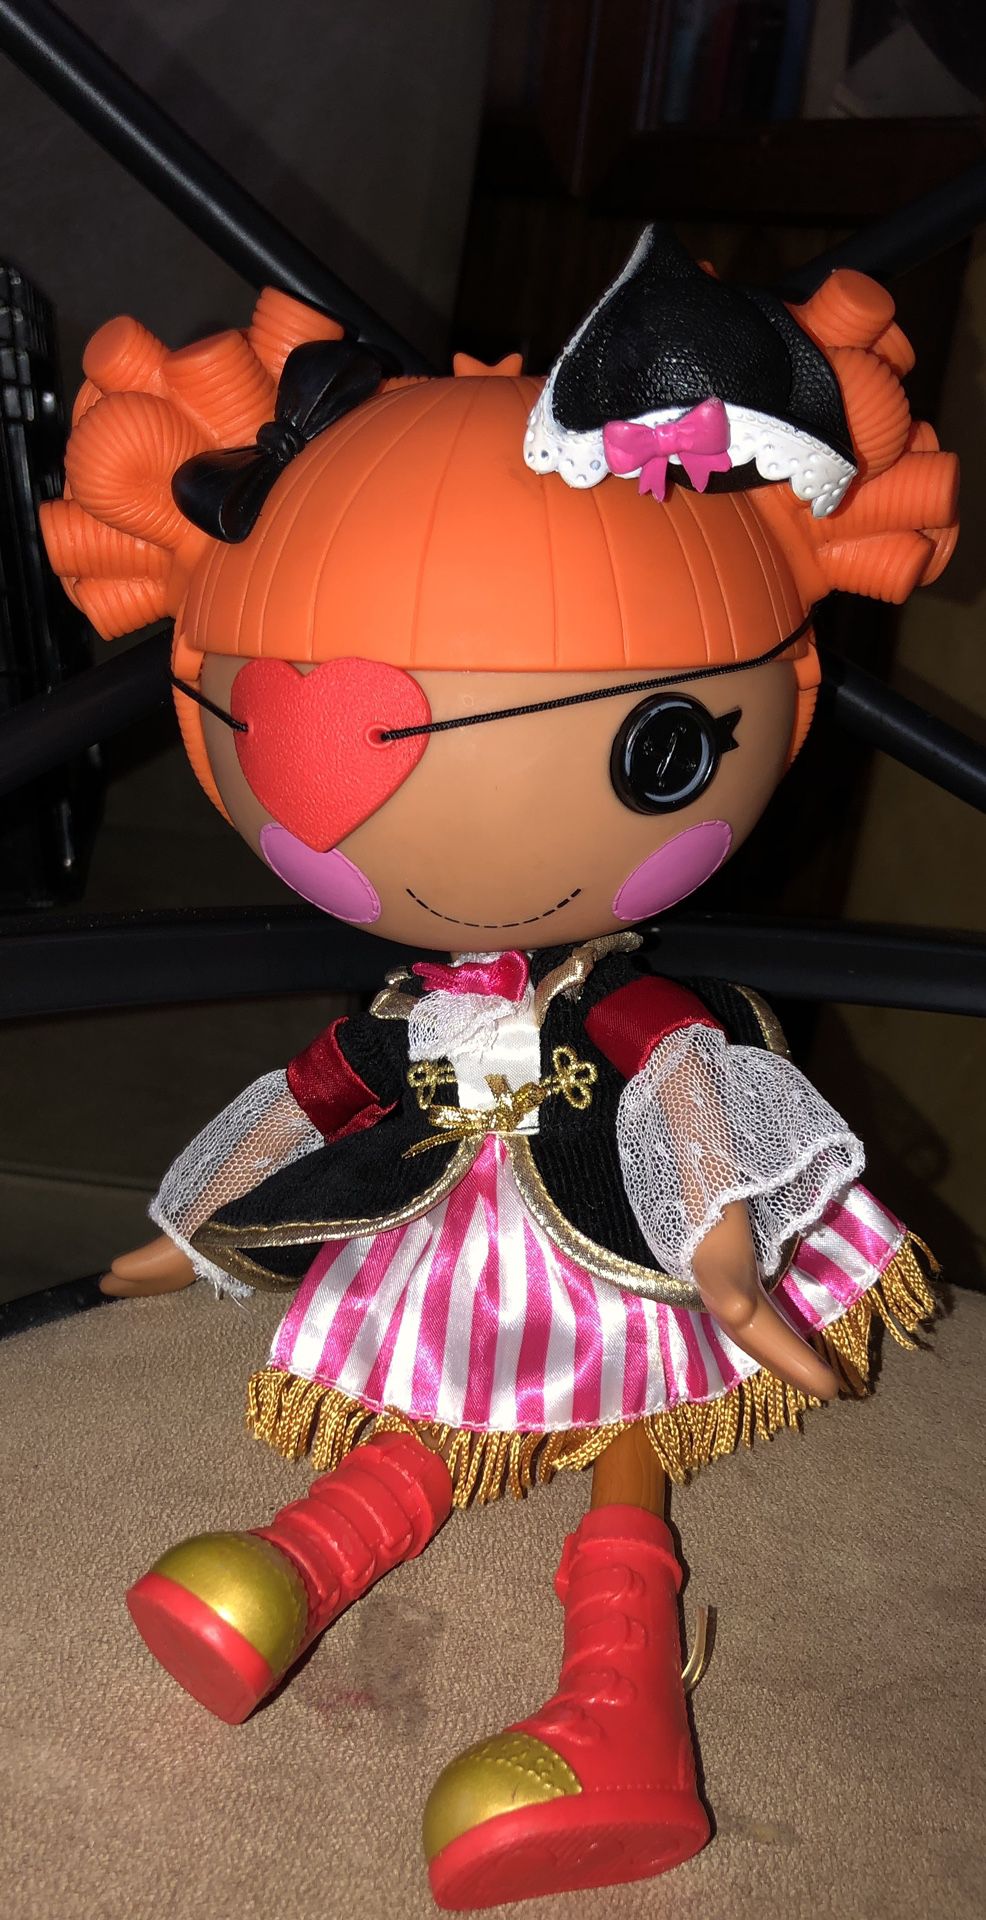 Lala Loopsy pirate full size doll complete outfit